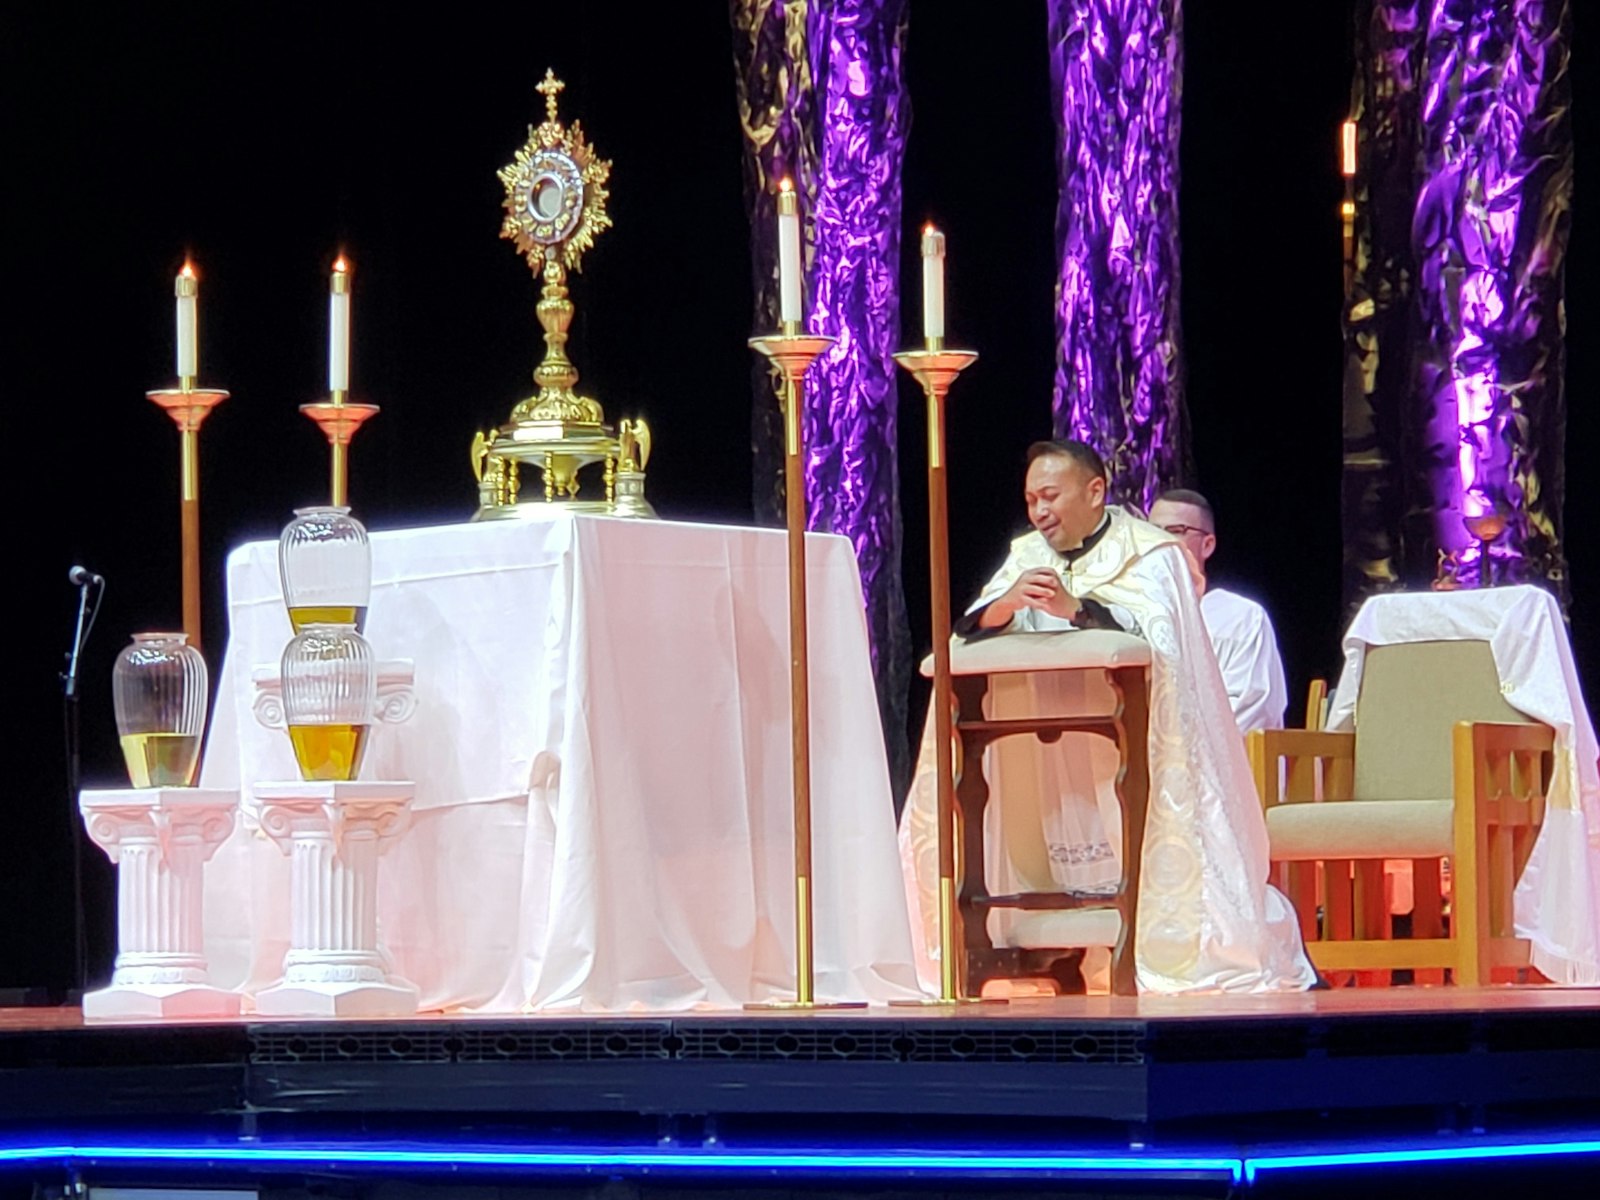 Father Leo Patalinghug speaks to the nearly 11,000 participants at the National Catholic Youth Conference while kneeling before the Blessed Sacrament during adoration at Lucas Oil Stadium in Indianapolis Nov. 19, 2021. (CNS photo/Natalie Hoefer, The Criterion)